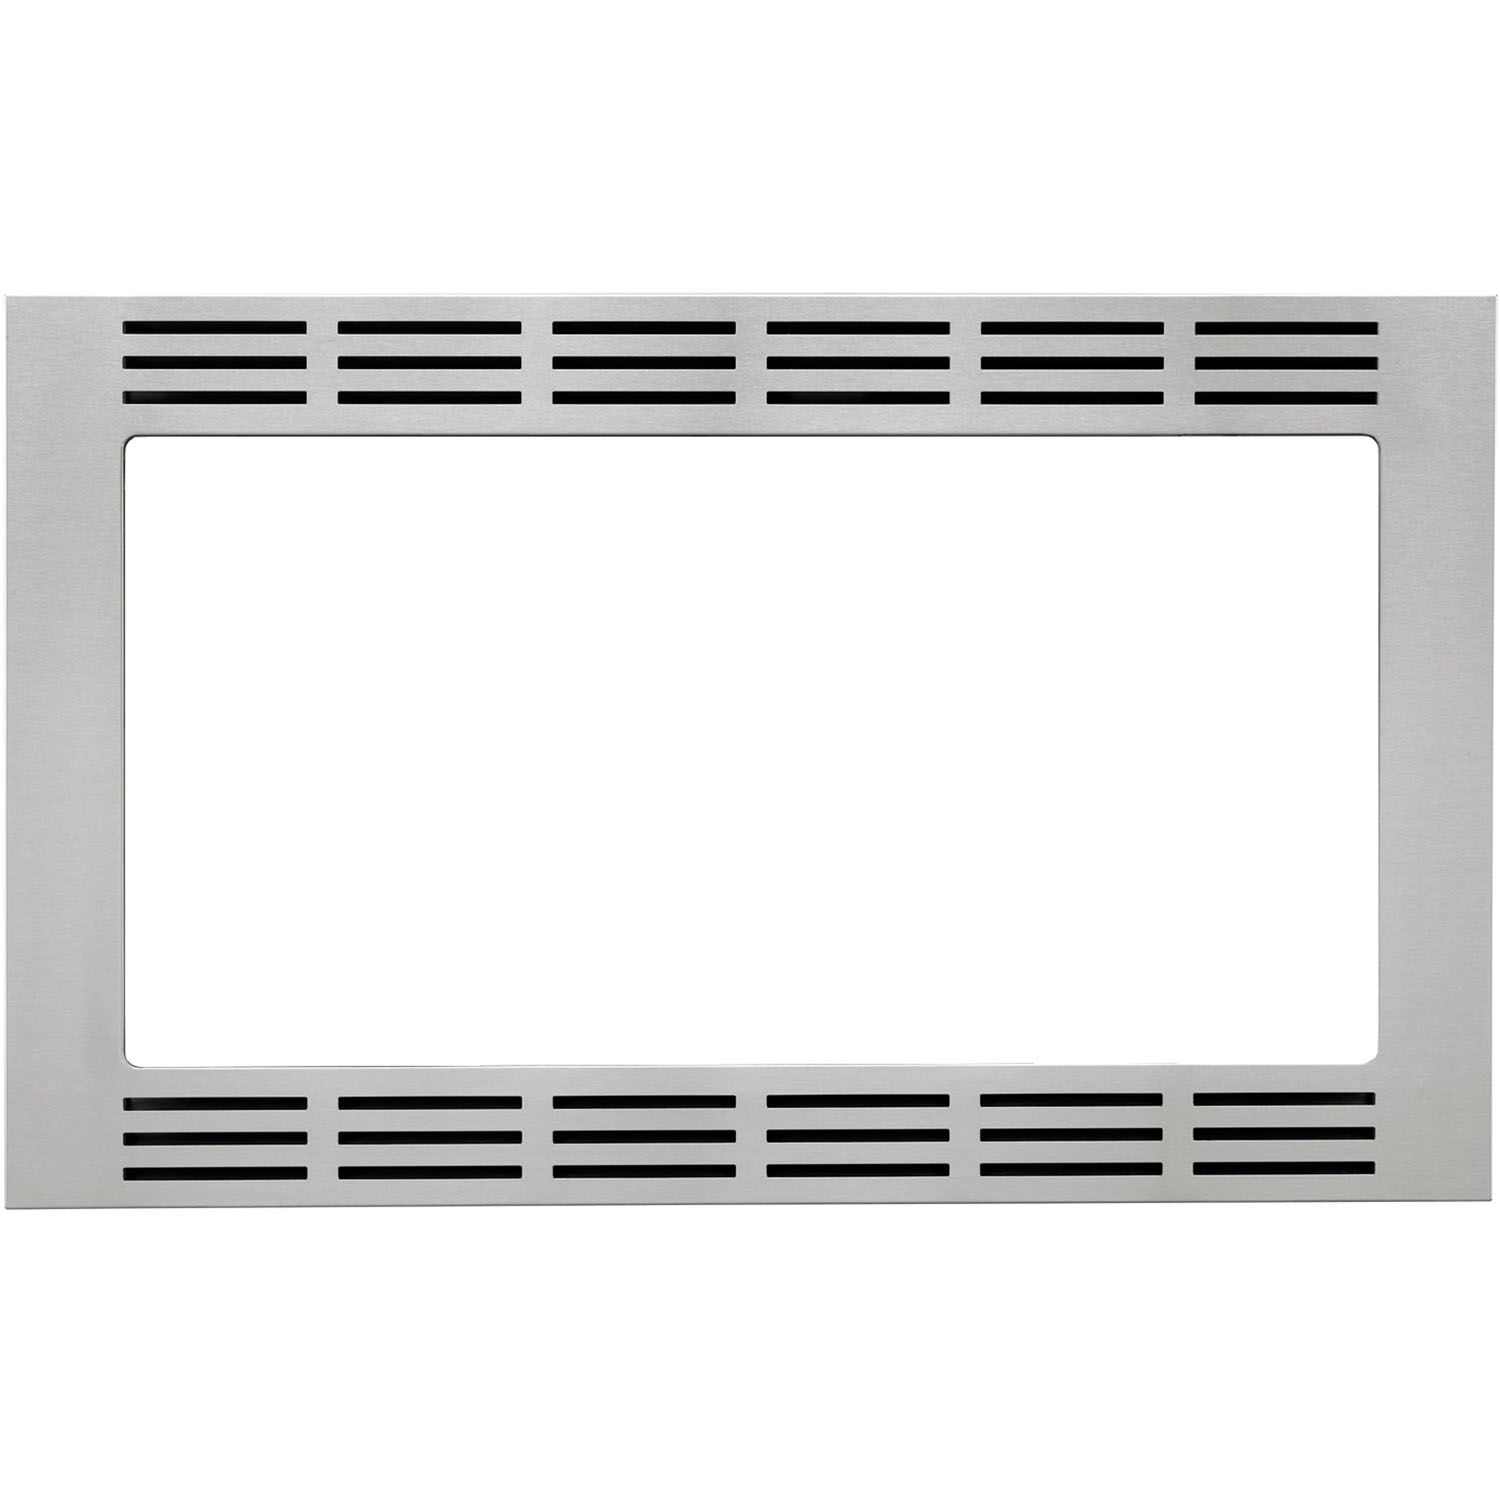 Panasonic NN-TK722SS 27 In. Built-in Trim Kit for 's 1.6 Cu. Ft. Microwave Ovens - Stainless Steel